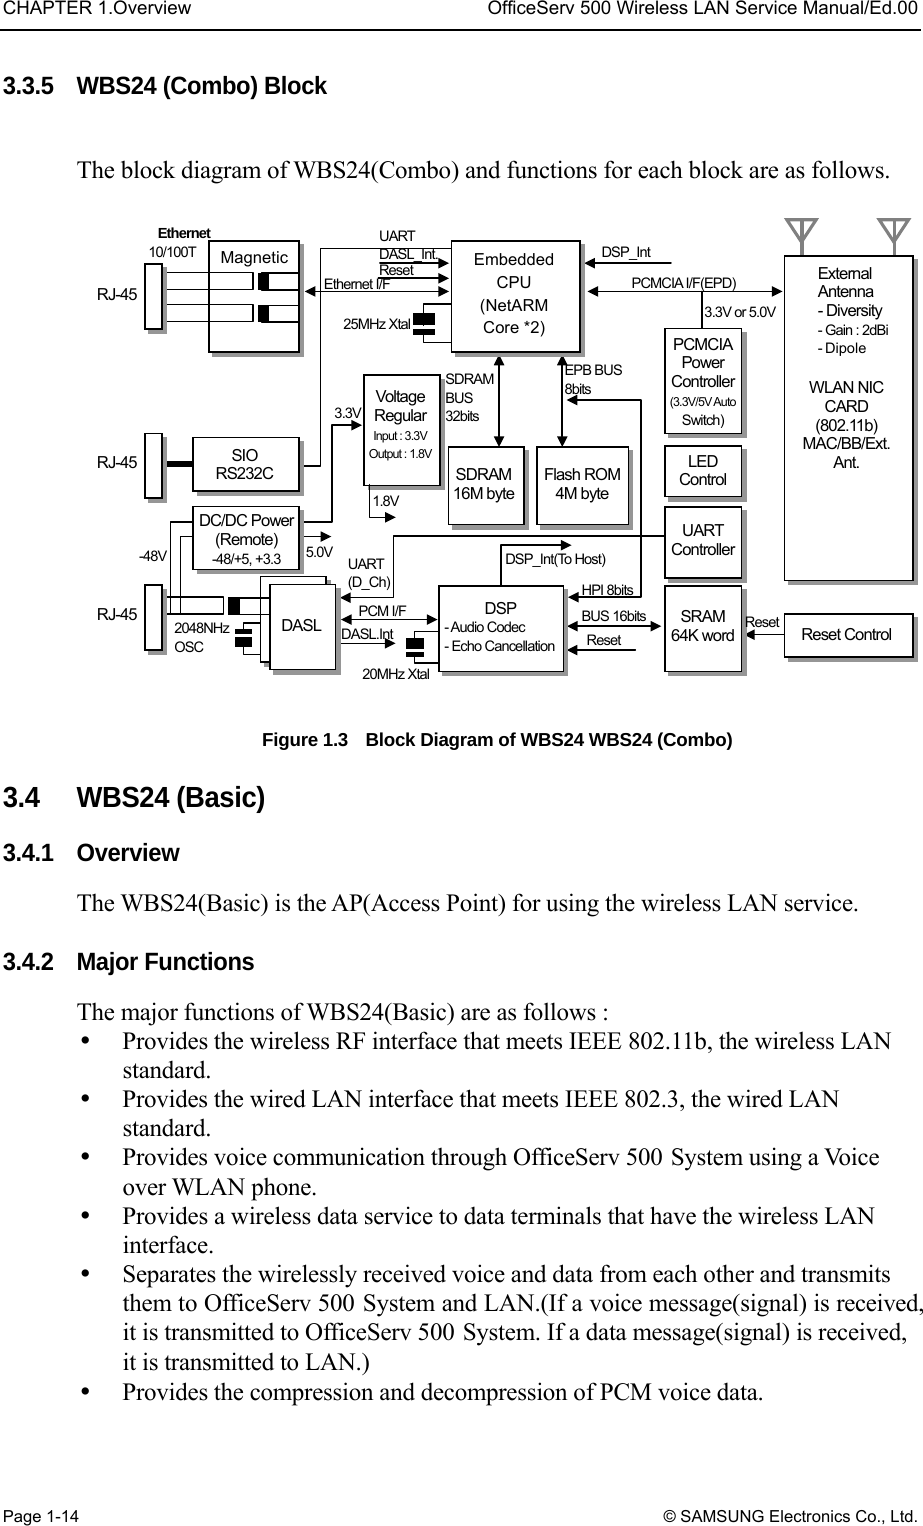 CHAPTER 1.Overview  OfficeServ 500 Wireless LAN Service Manual/Ed.00 Page 1-14 © SAMSUNG Electronics Co., Ltd. 3.3.5    WBS24 (Combo) Block  The block diagram of WBS24(Combo) and functions for each block are as follows.  Figure 1.3    Block Diagram of WBS24 WBS24 (Combo)  3.4 WBS24 (Basic) 3.4.1 Overview The WBS24(Basic) is the AP(Access Point) for using the wireless LAN service.    3.4.2 Major Functions The major functions of WBS24(Basic) are as follows :       Provides the wireless RF interface that meets IEEE 802.11b, the wireless LAN standard.   Provides the wired LAN interface that meets IEEE 802.3, the wired LAN standard.   Provides voice communication through OfficeServ 500 System using a Voice over WLAN phone.     Provides a wireless data service to data terminals that have the wireless LAN interface.    Separates the wirelessly received voice and data from each other and transmits them to OfficeServ 500 System and LAN.(If a voice message(signal) is received, it is transmitted to OfficeServ 500 System. If a data message(signal) is received, it is transmitted to LAN.)     Provides the compression and decompression of PCM voice data.    Magnetic  EmbeddedCPU (NetARM Core *2)PCMCIA Power Controller (3.3V/5V Auto Switch)LED Control UART Controller SRAM 64K word Reset ControlWLAN NIC CARD (802.11b) MAC/BB/Ext.Ant. External Antenna - Diversity - Gain : 2dBi - Dipole Flash ROM 4M byteSDRAM16M byteVoltageRegularInput : 3.3V Output : 1.8VSIO RS232C DC/DC Power (Remote) -48/+5, +3.3 DASL DSP - Audio Codec - Echo CancellationRJ-45 RJ-45 RJ-45 Ethernet 10/100T UART DASL_Int. Reset Ethernet I/F25MHz Xtal SDRAM BUS 32bits EPB BUS 8bits DSP_Int(To Host) 1.8V 3.3V 5.0V  UART(D_Ch)PCM I/F DASL.Int 2048NHzOSC 20MHz XtalReset BUS 16bits HPI 8bits Reset DSP_Int PCMCIA I/F(EPD) 3.3V or 5.0V -48V 